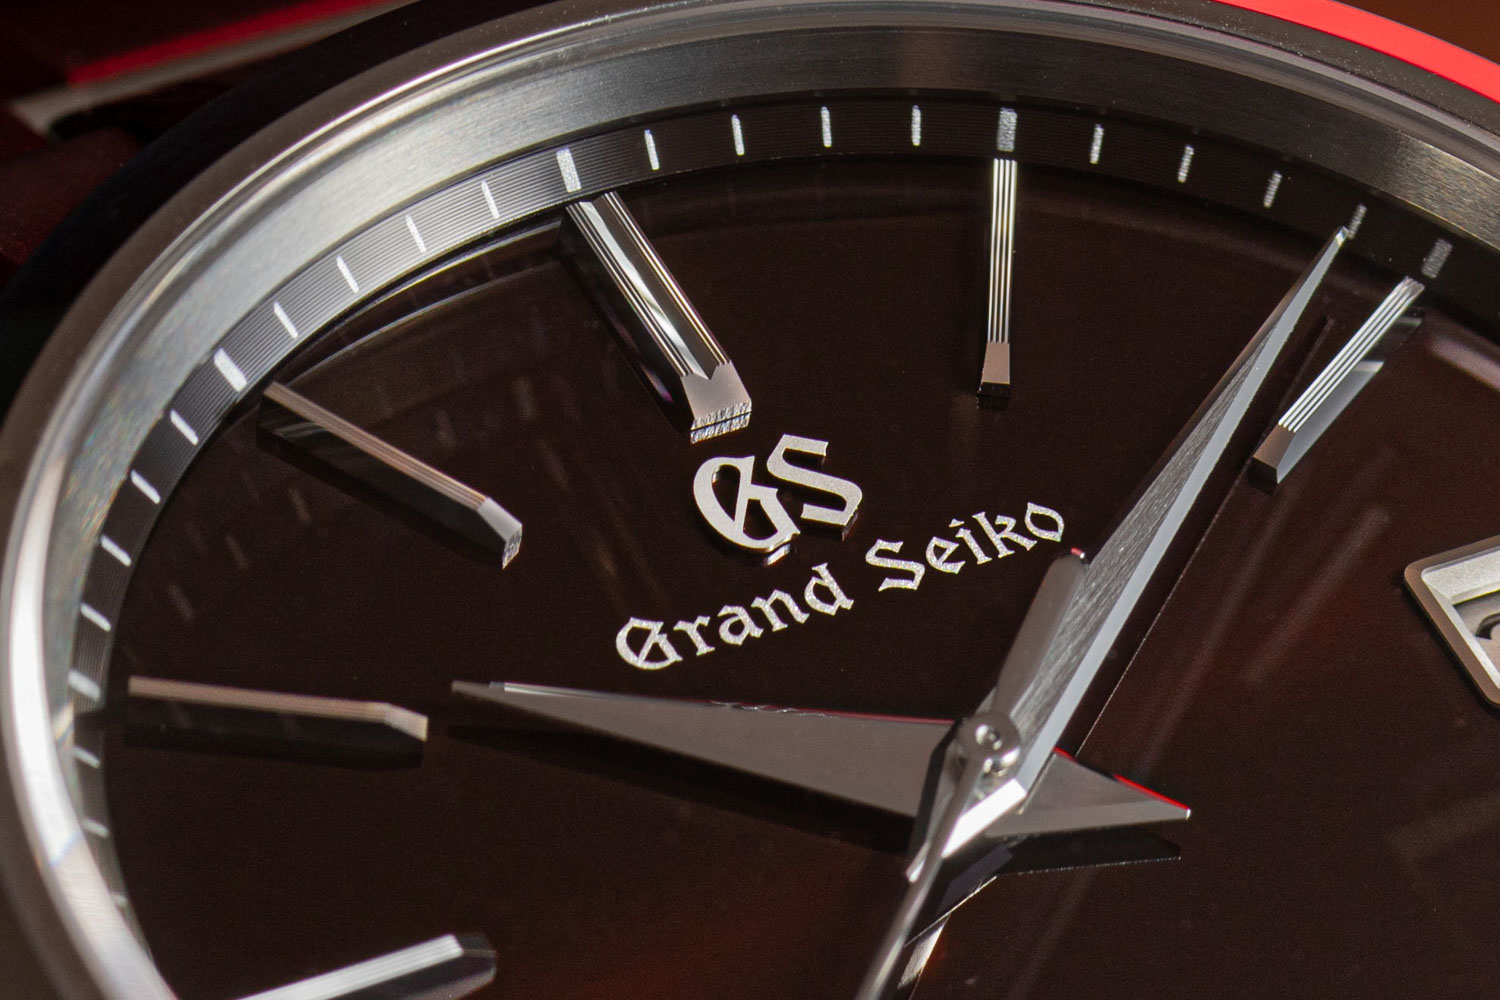 The Grand Seiko Hi-Beat SBGH245G with a sunray finish dial that creates an almost constant lightshow on the wrist when outdoors and is a hue that is mid-way between brown and burgundy (©Revolution)